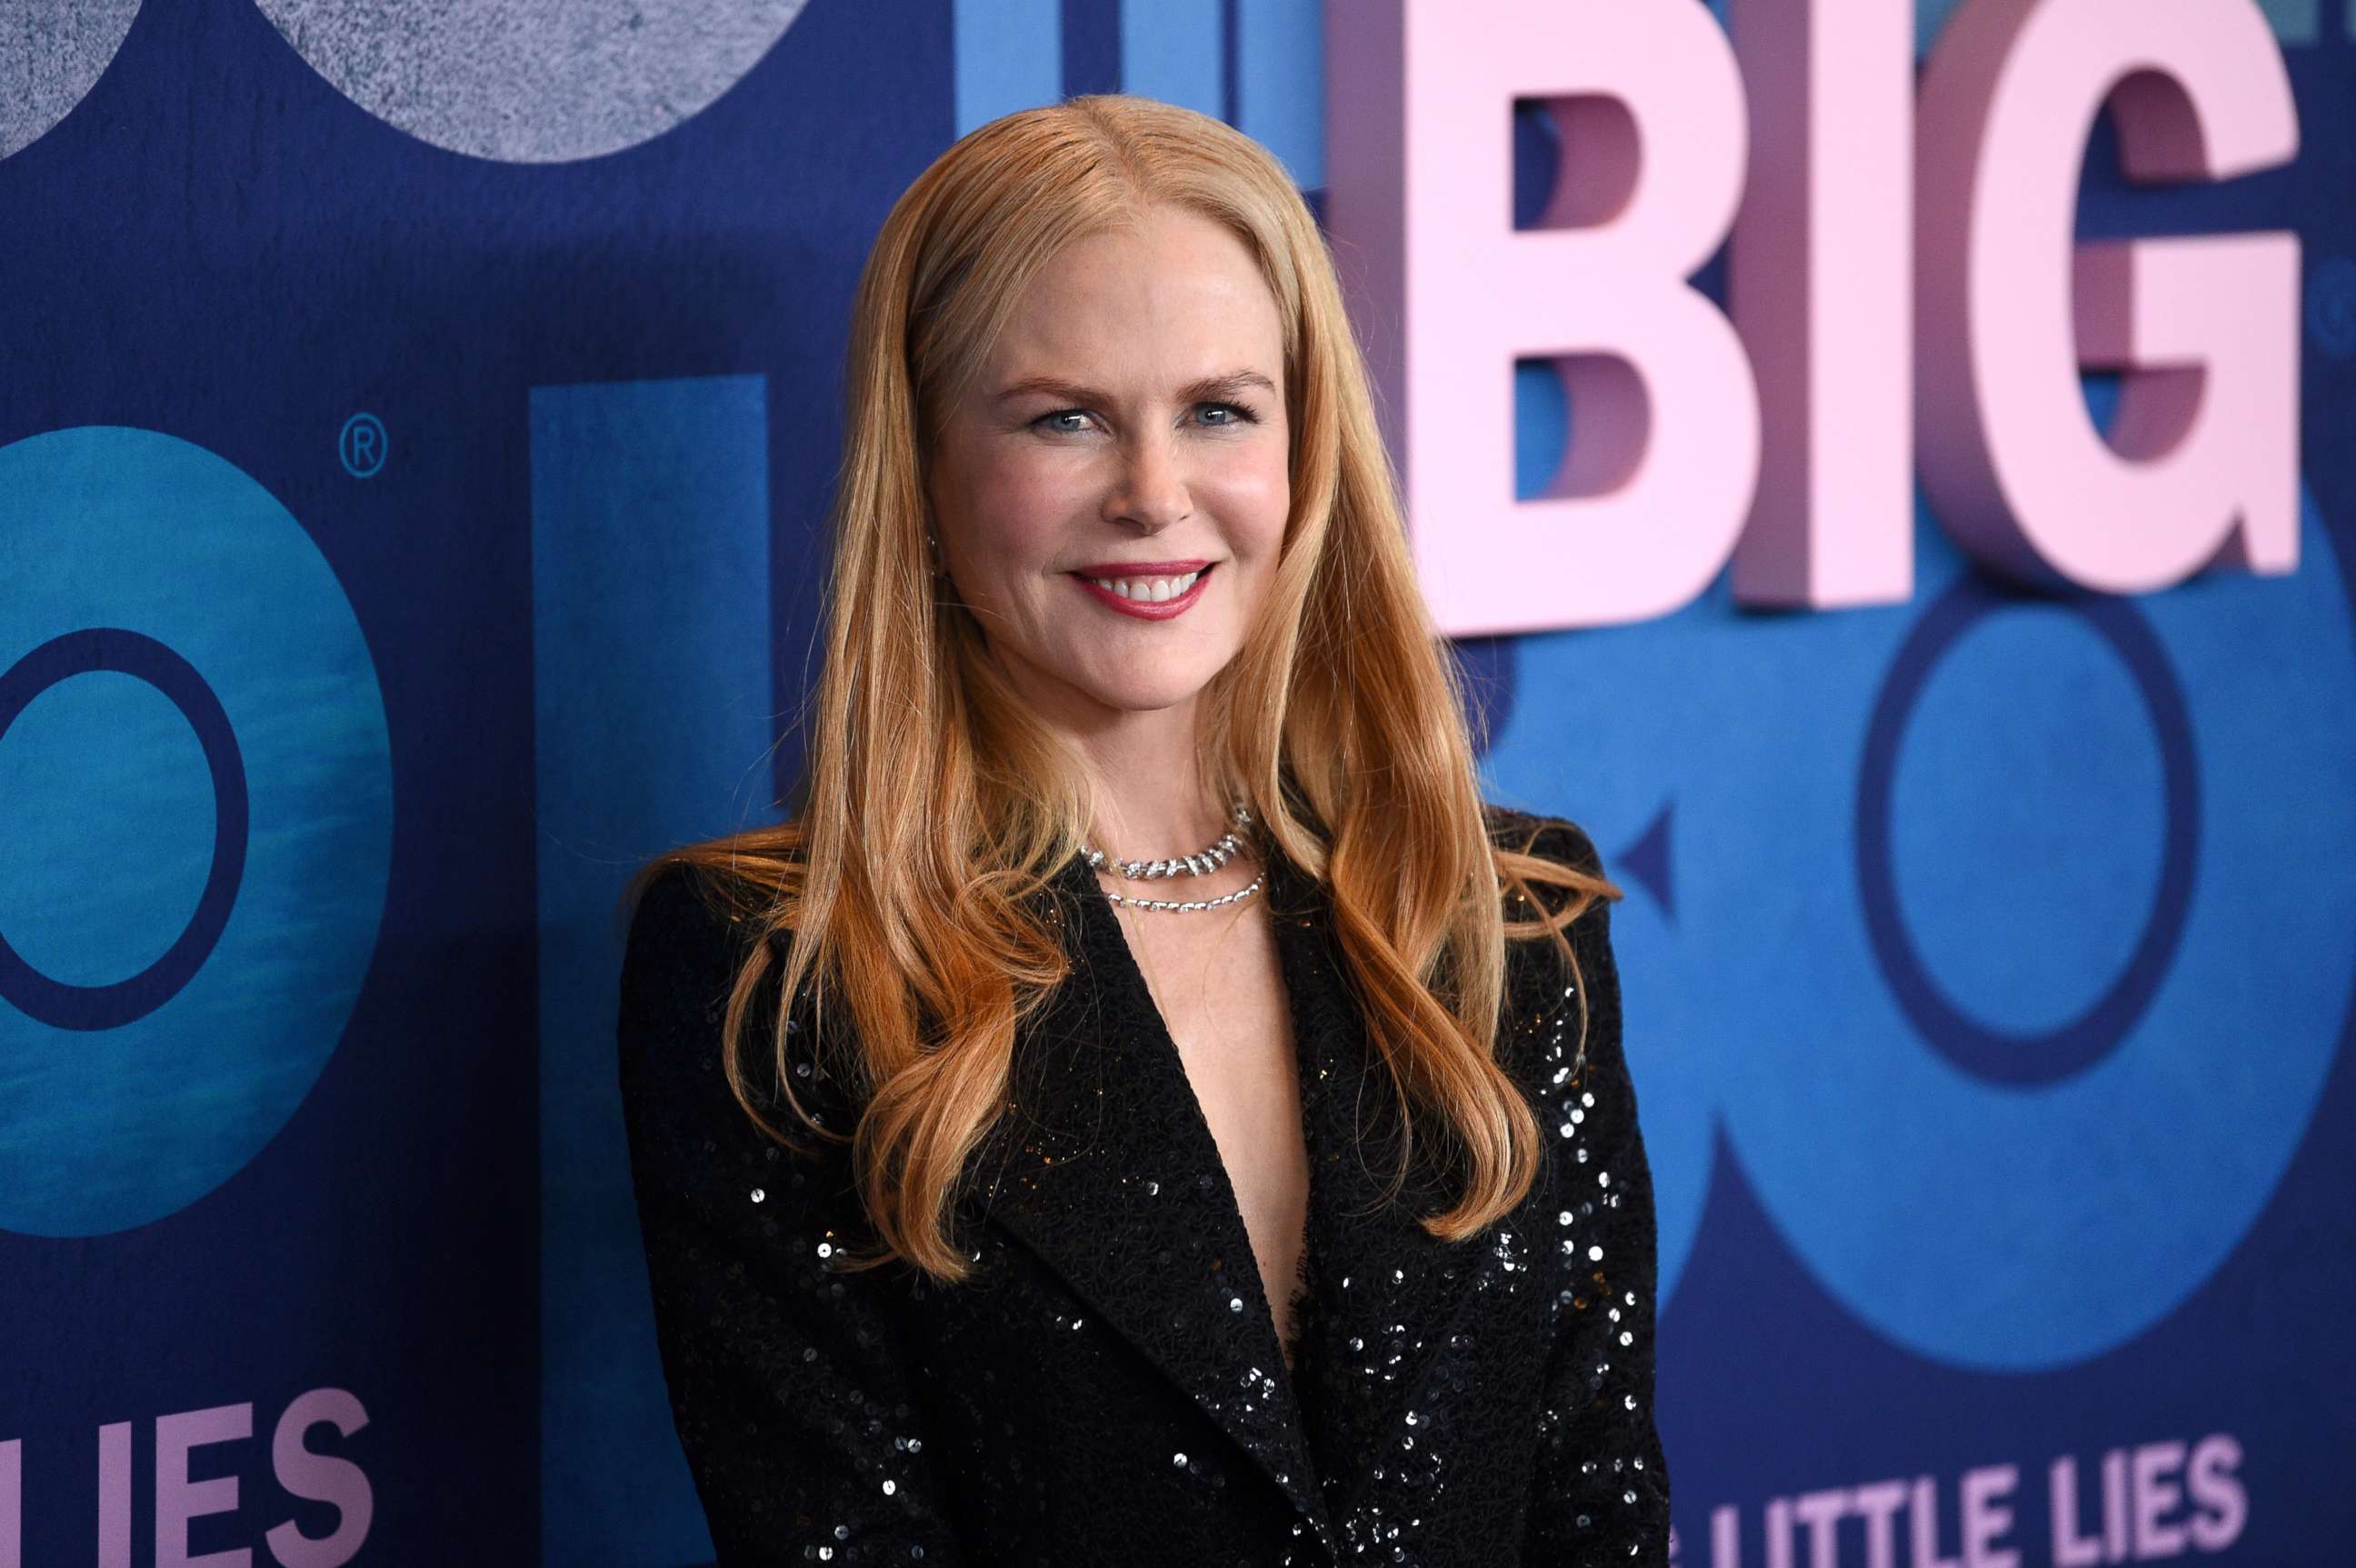 PHOTO: Nicole Kidman attends the premiere of HBO's "Big Little Lies" season two at Jazz at Lincoln Center, May 29, 2019, in New York.